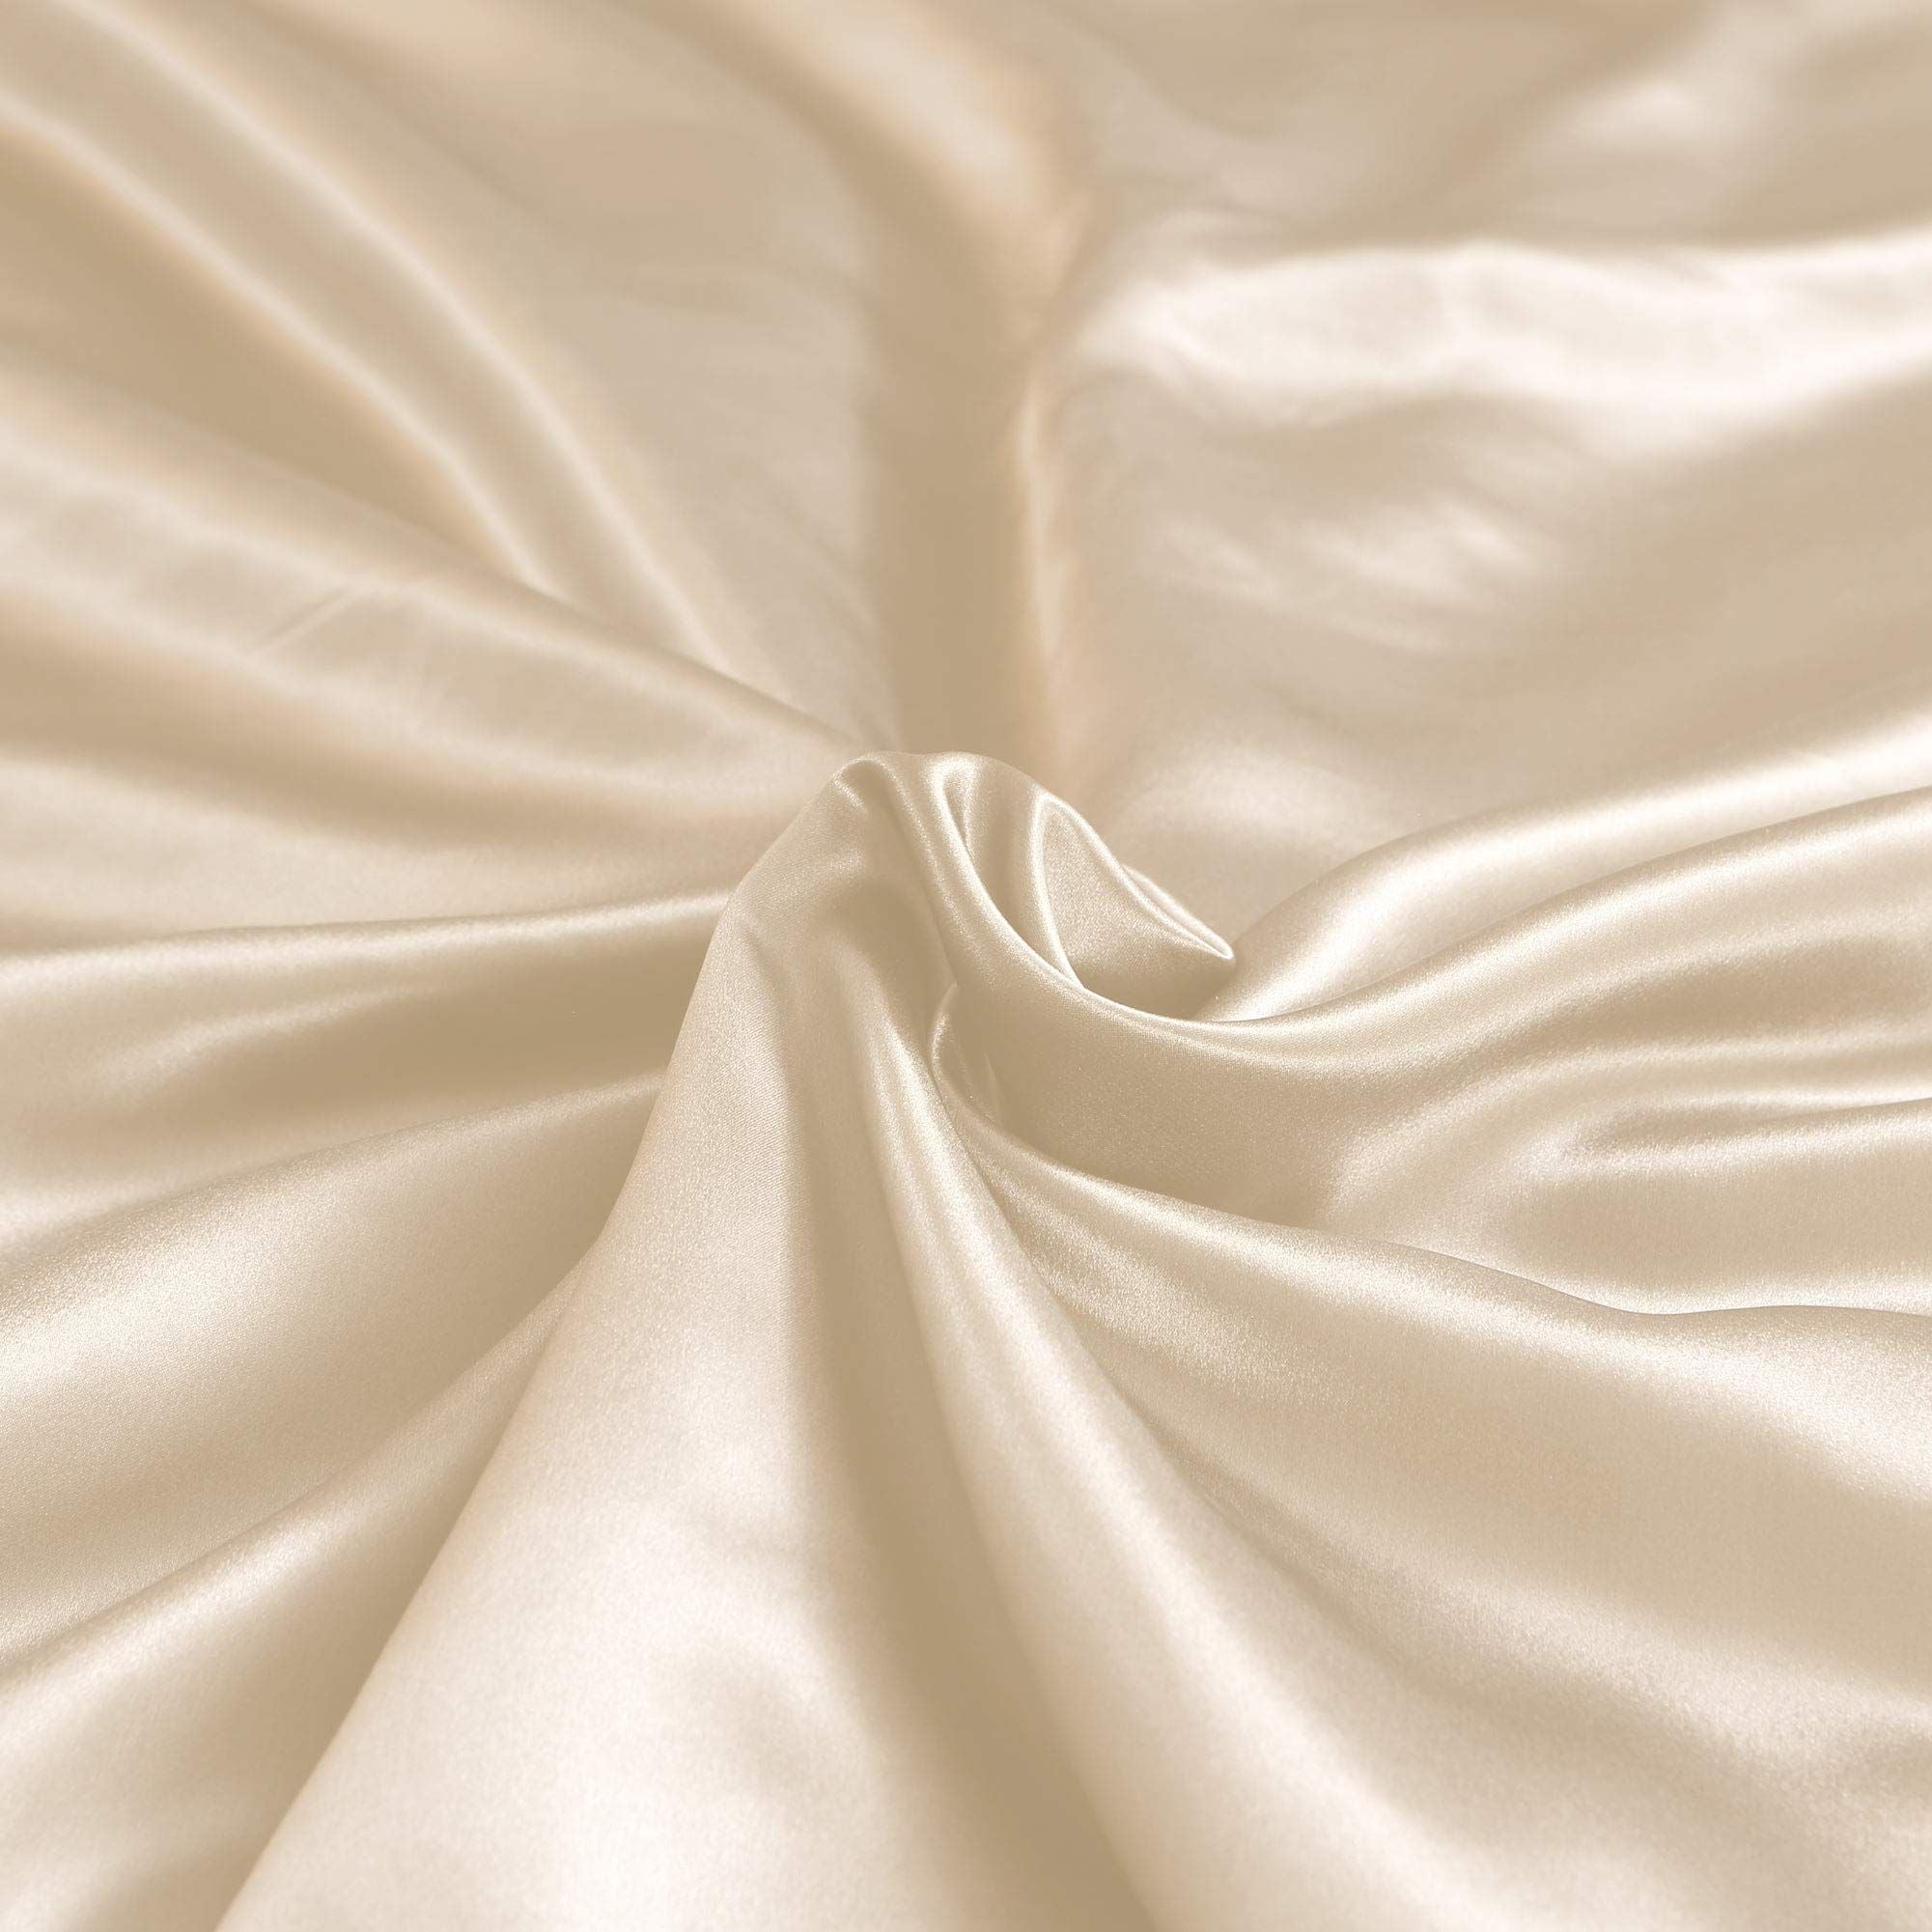 which is best silk or satin pillowcases